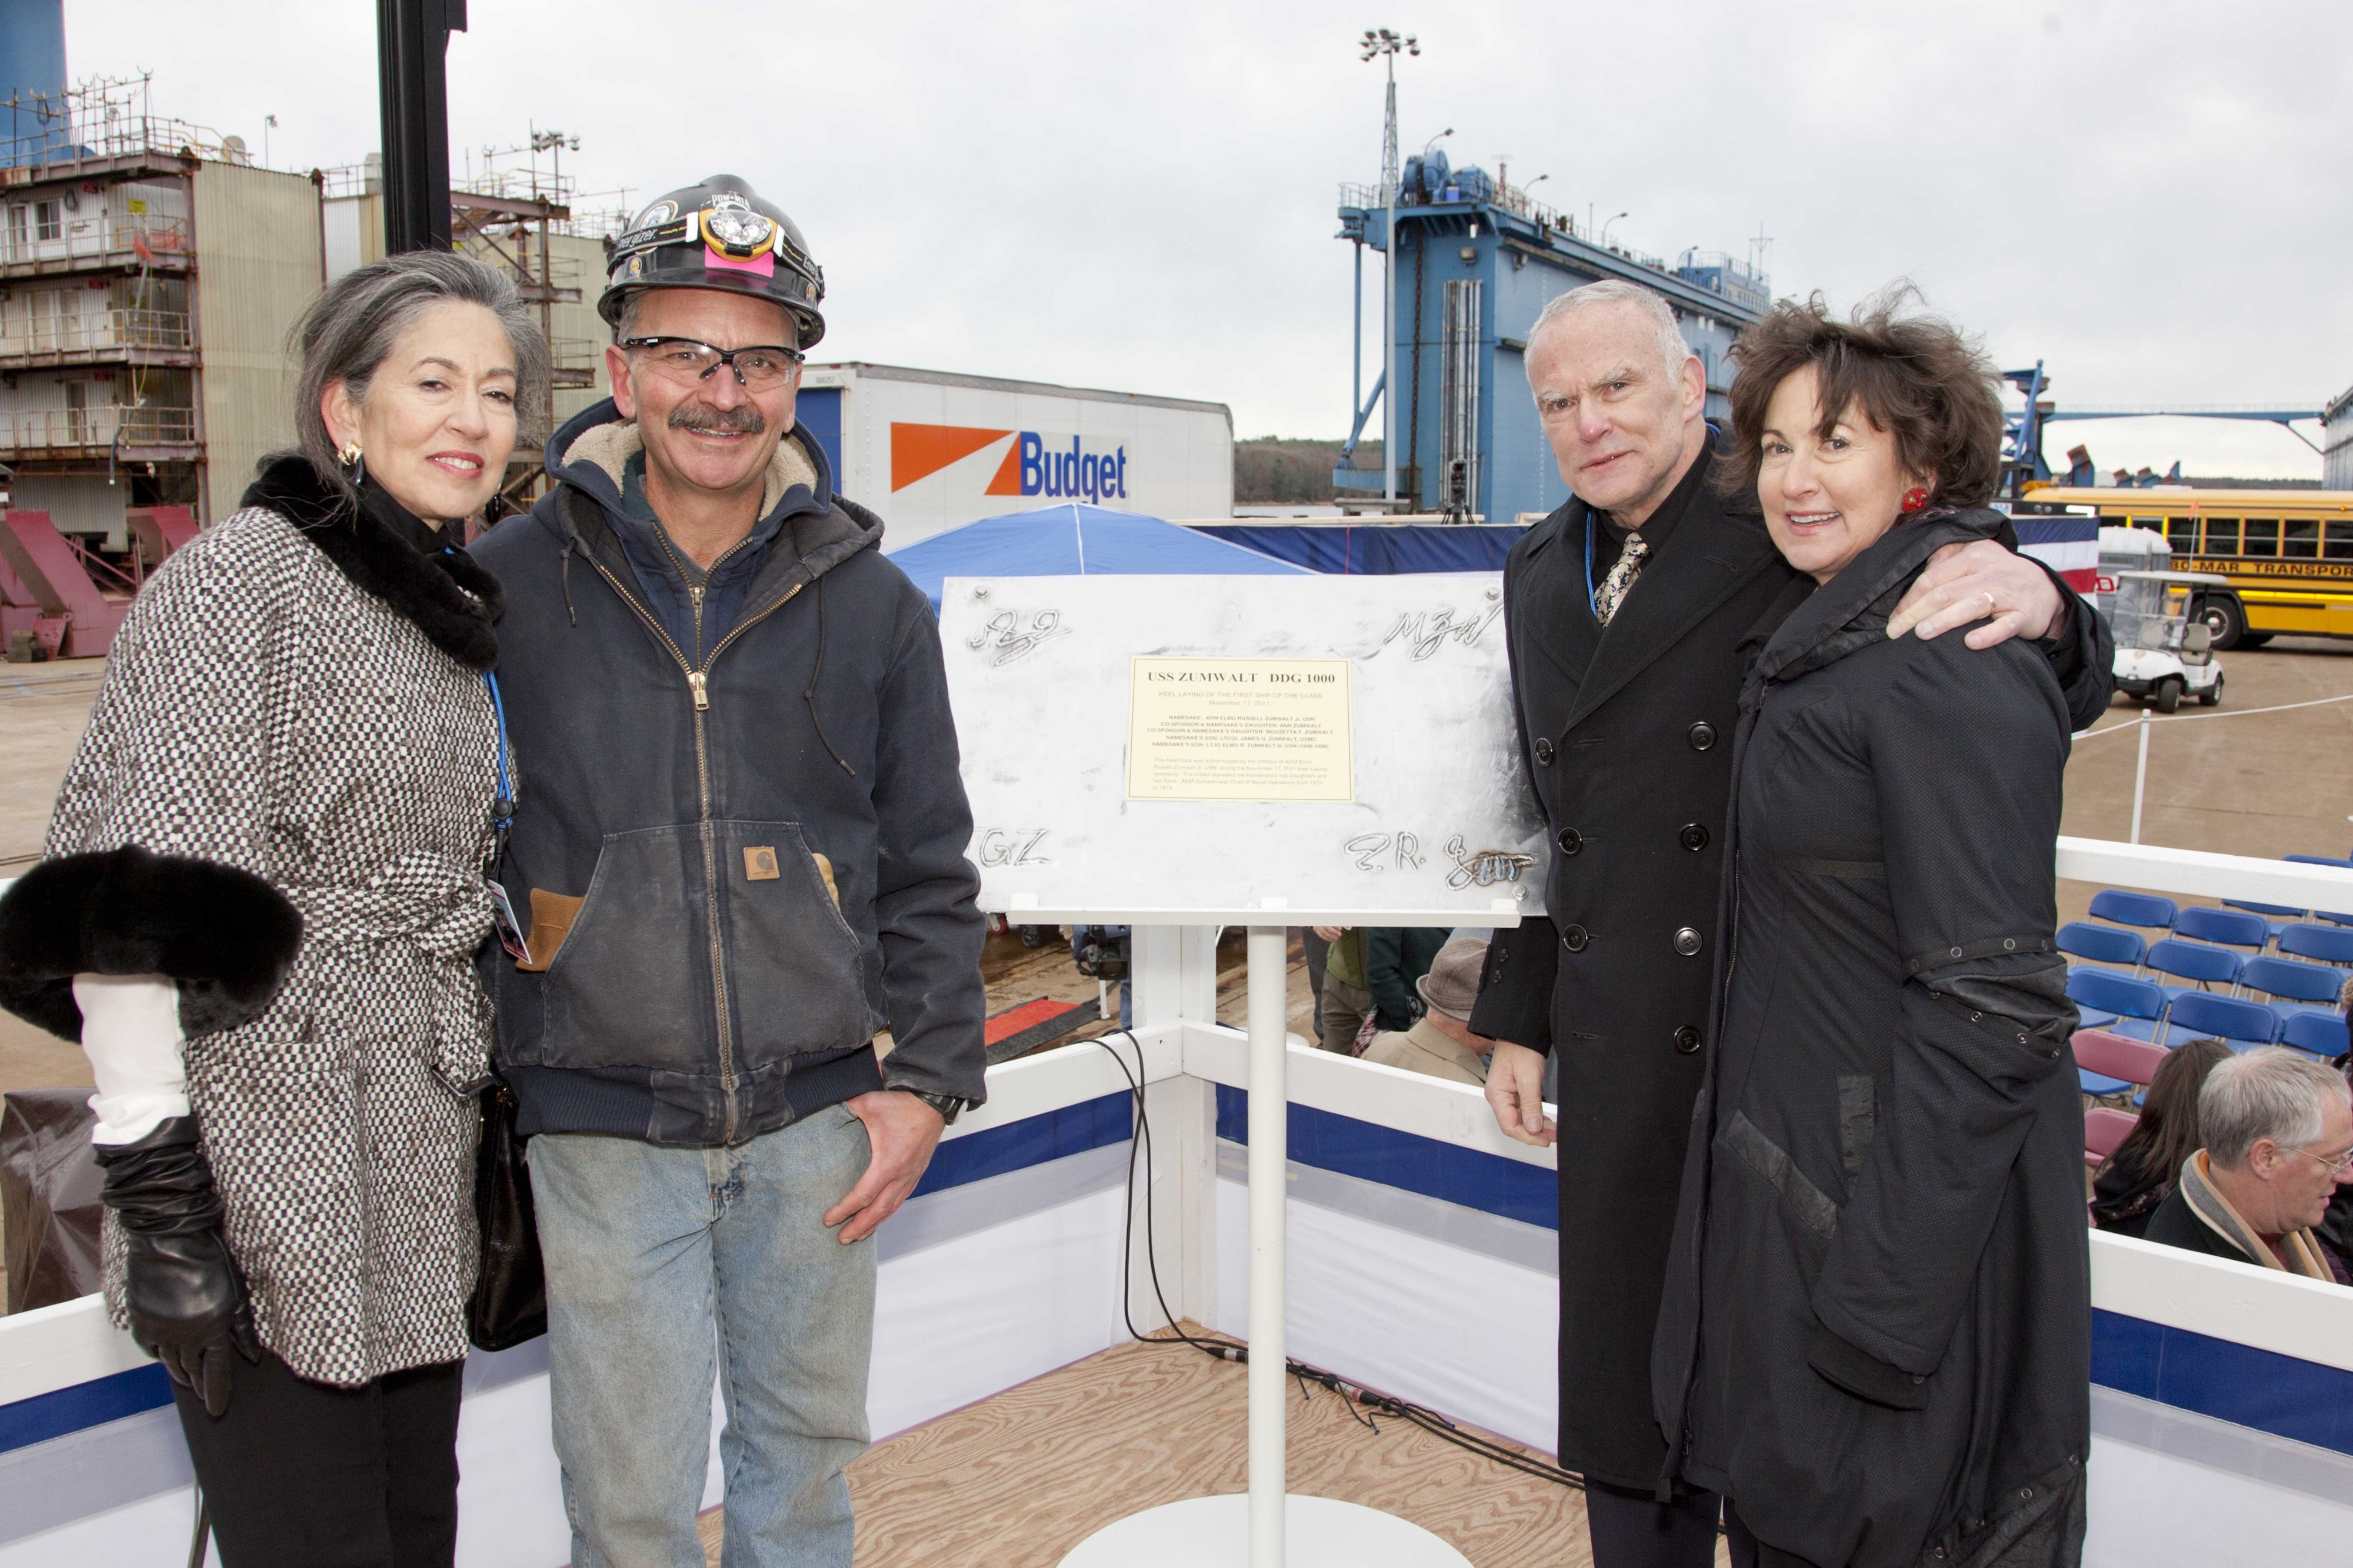 Flickr - Official U.S. Navy Imagery - Zumwalt family post for a picture during keel-laying.